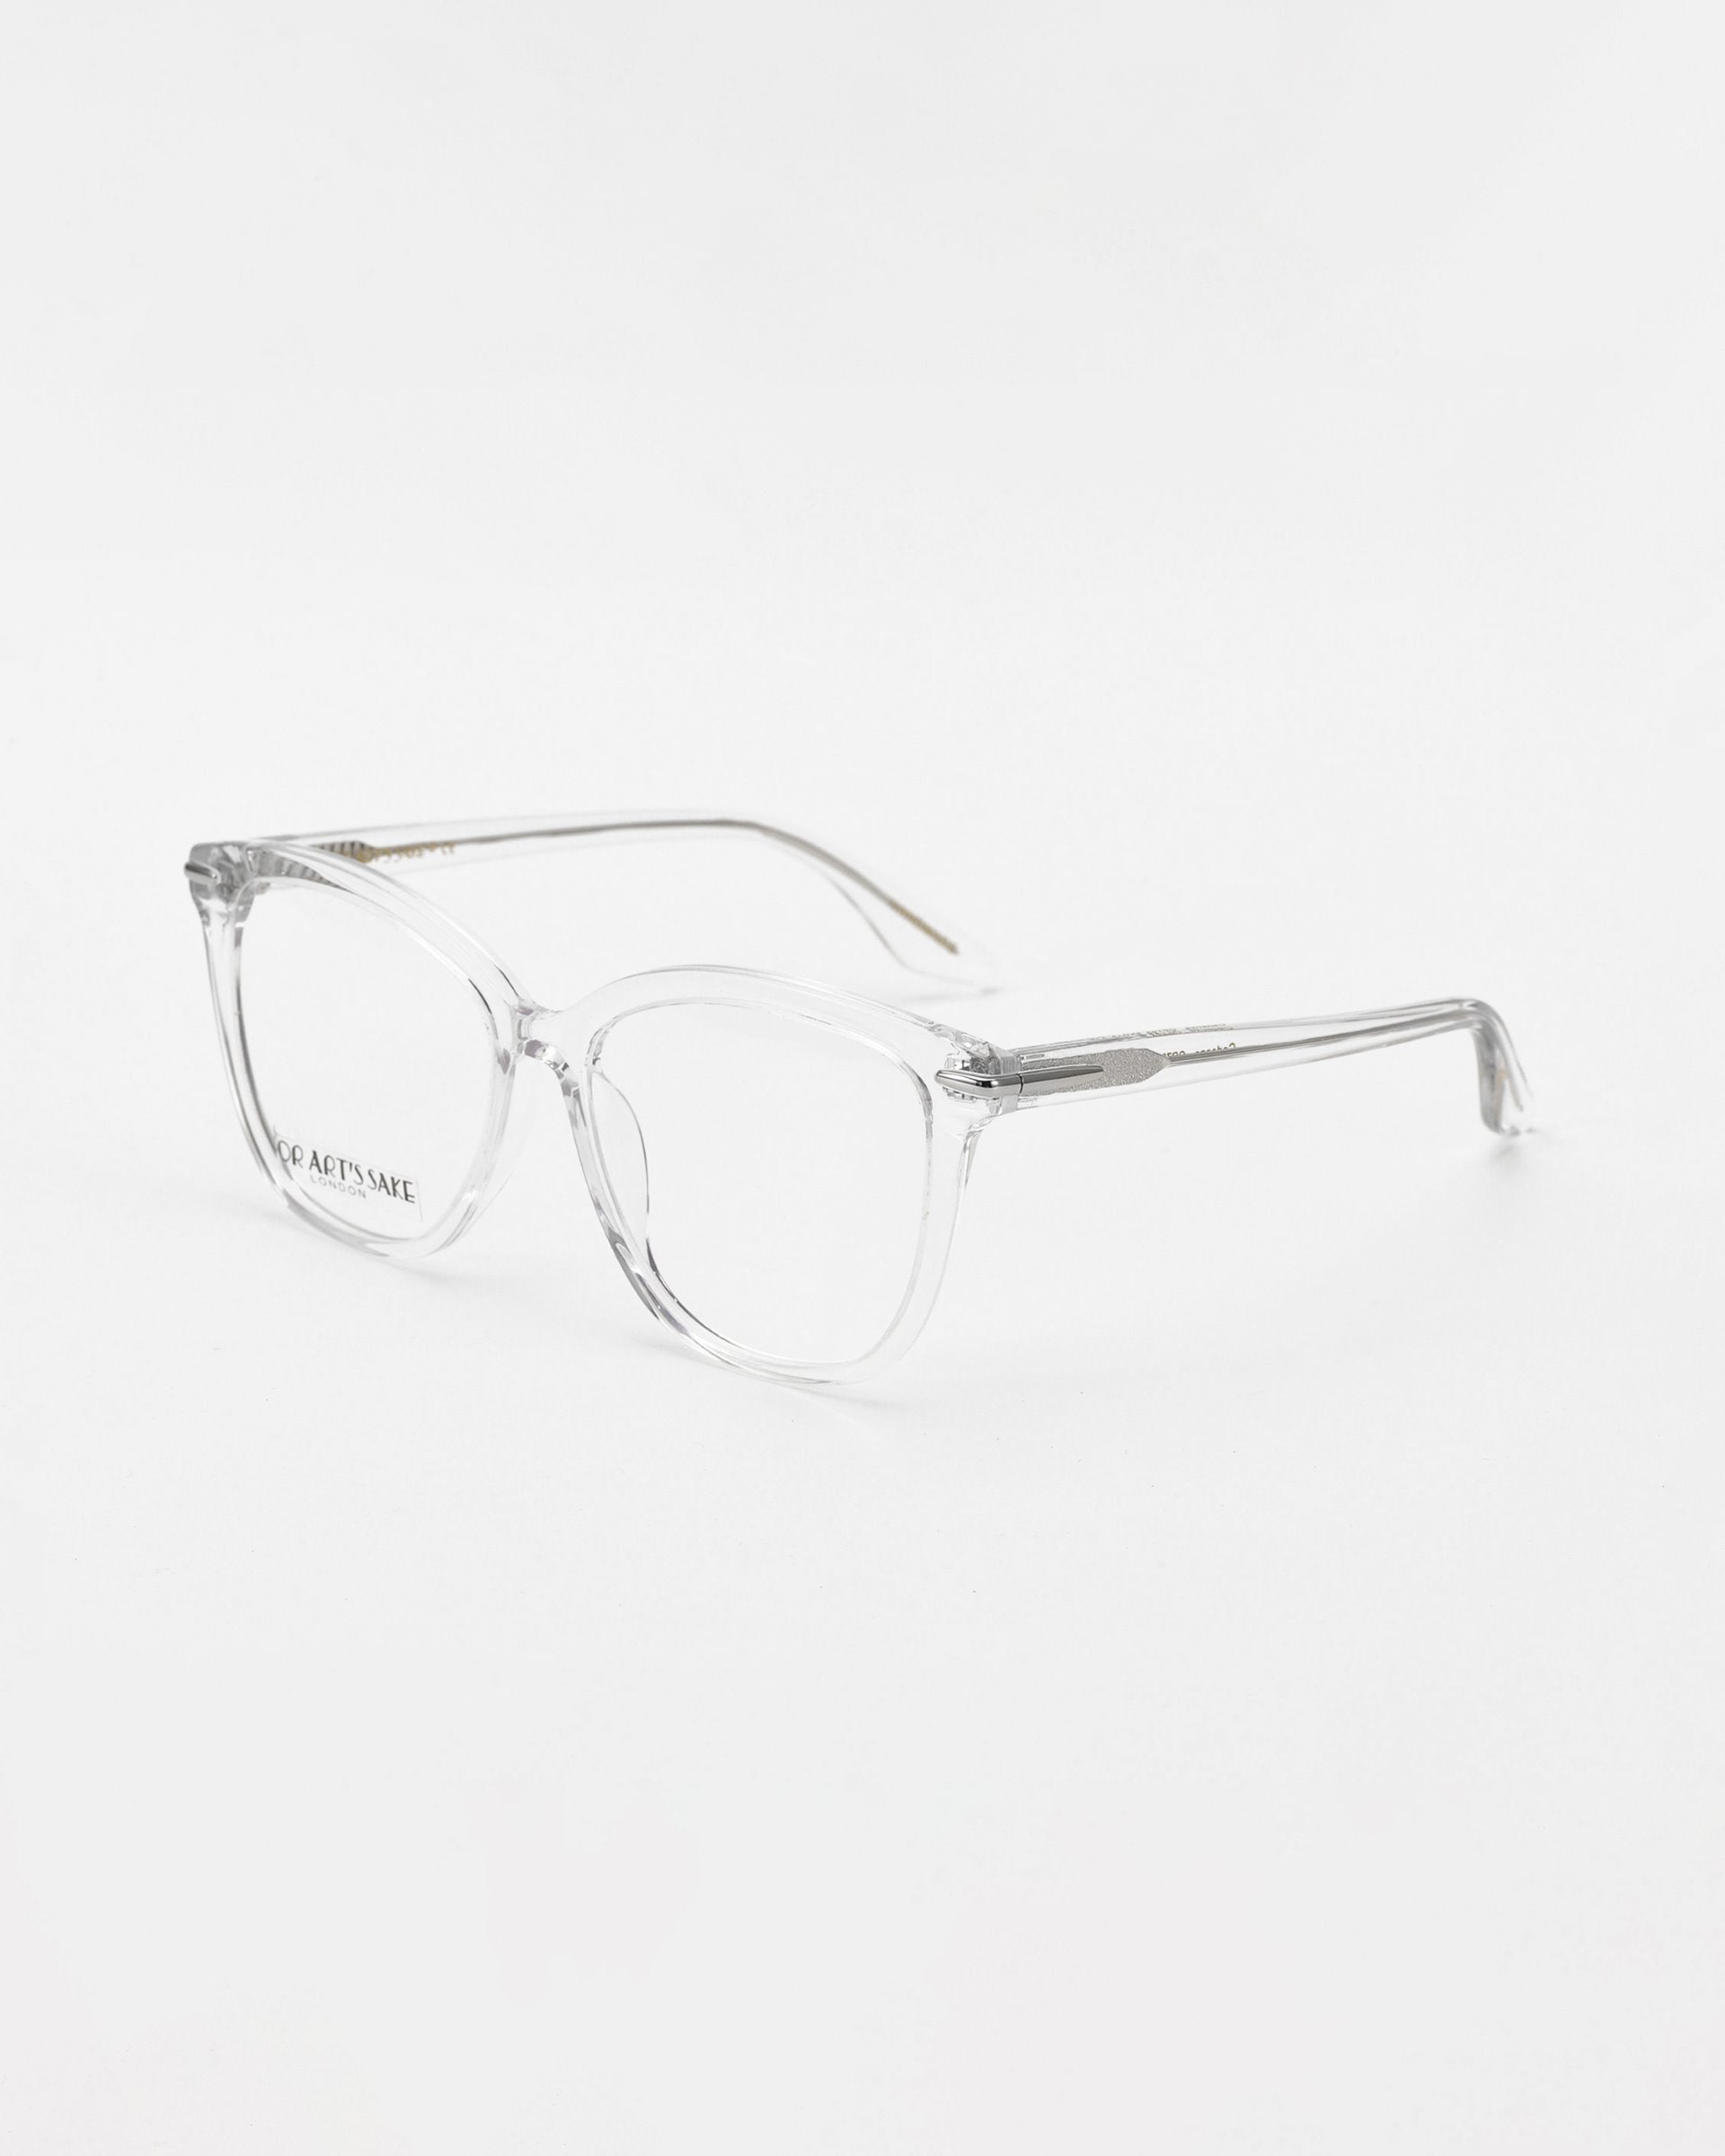 Clear, rectangular For Art's Sake® Cadenza optical glasses with transparent frames on a white background. The glasses have a simple and minimalist design, with sleek, thin, and unobtrusive arms.